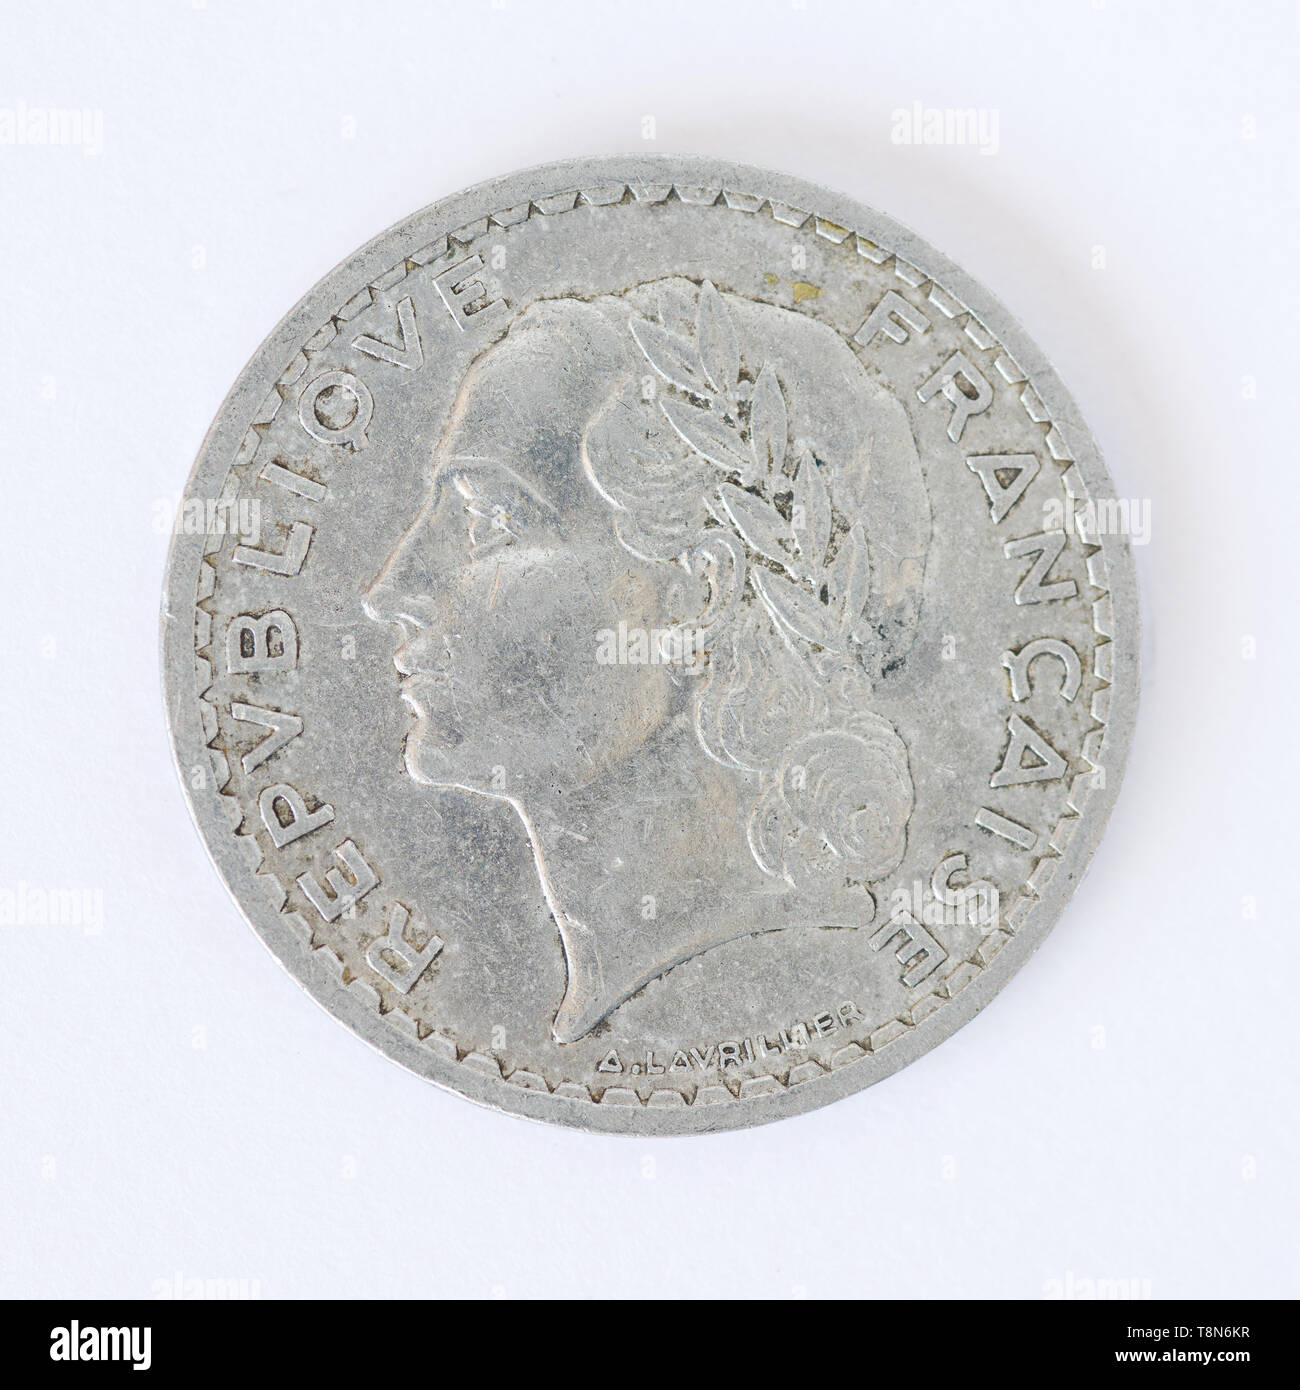 French 5 Francs Coin 1947 Stock Photo Alamy